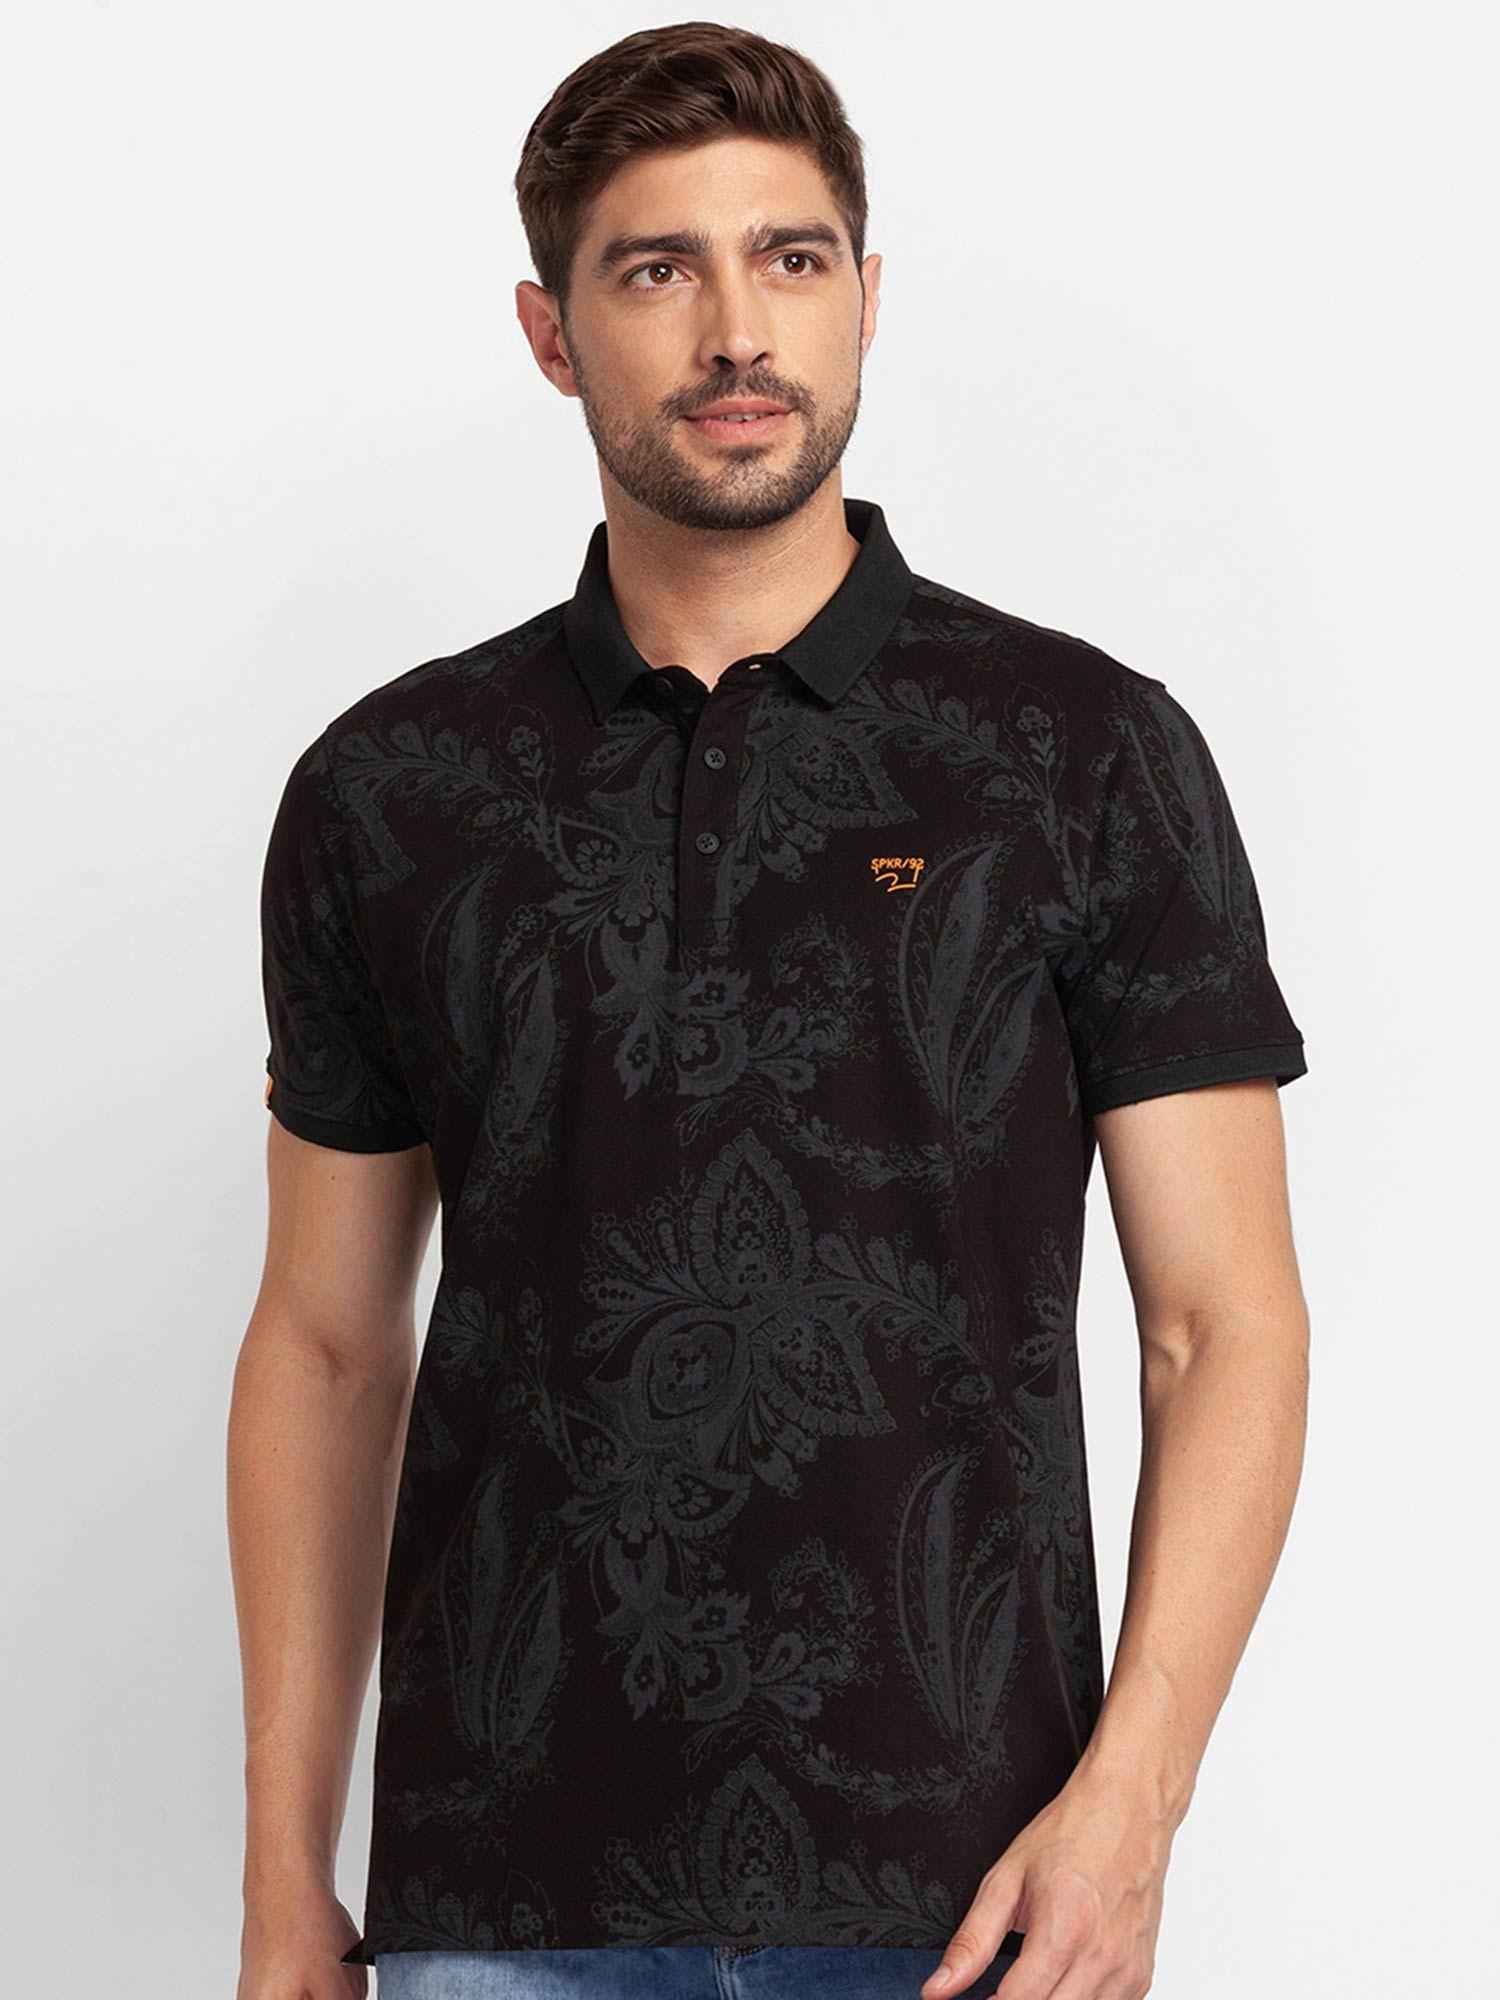 black-cotton-half-sleeve-printed-casual-polo-t-shirt-for-men